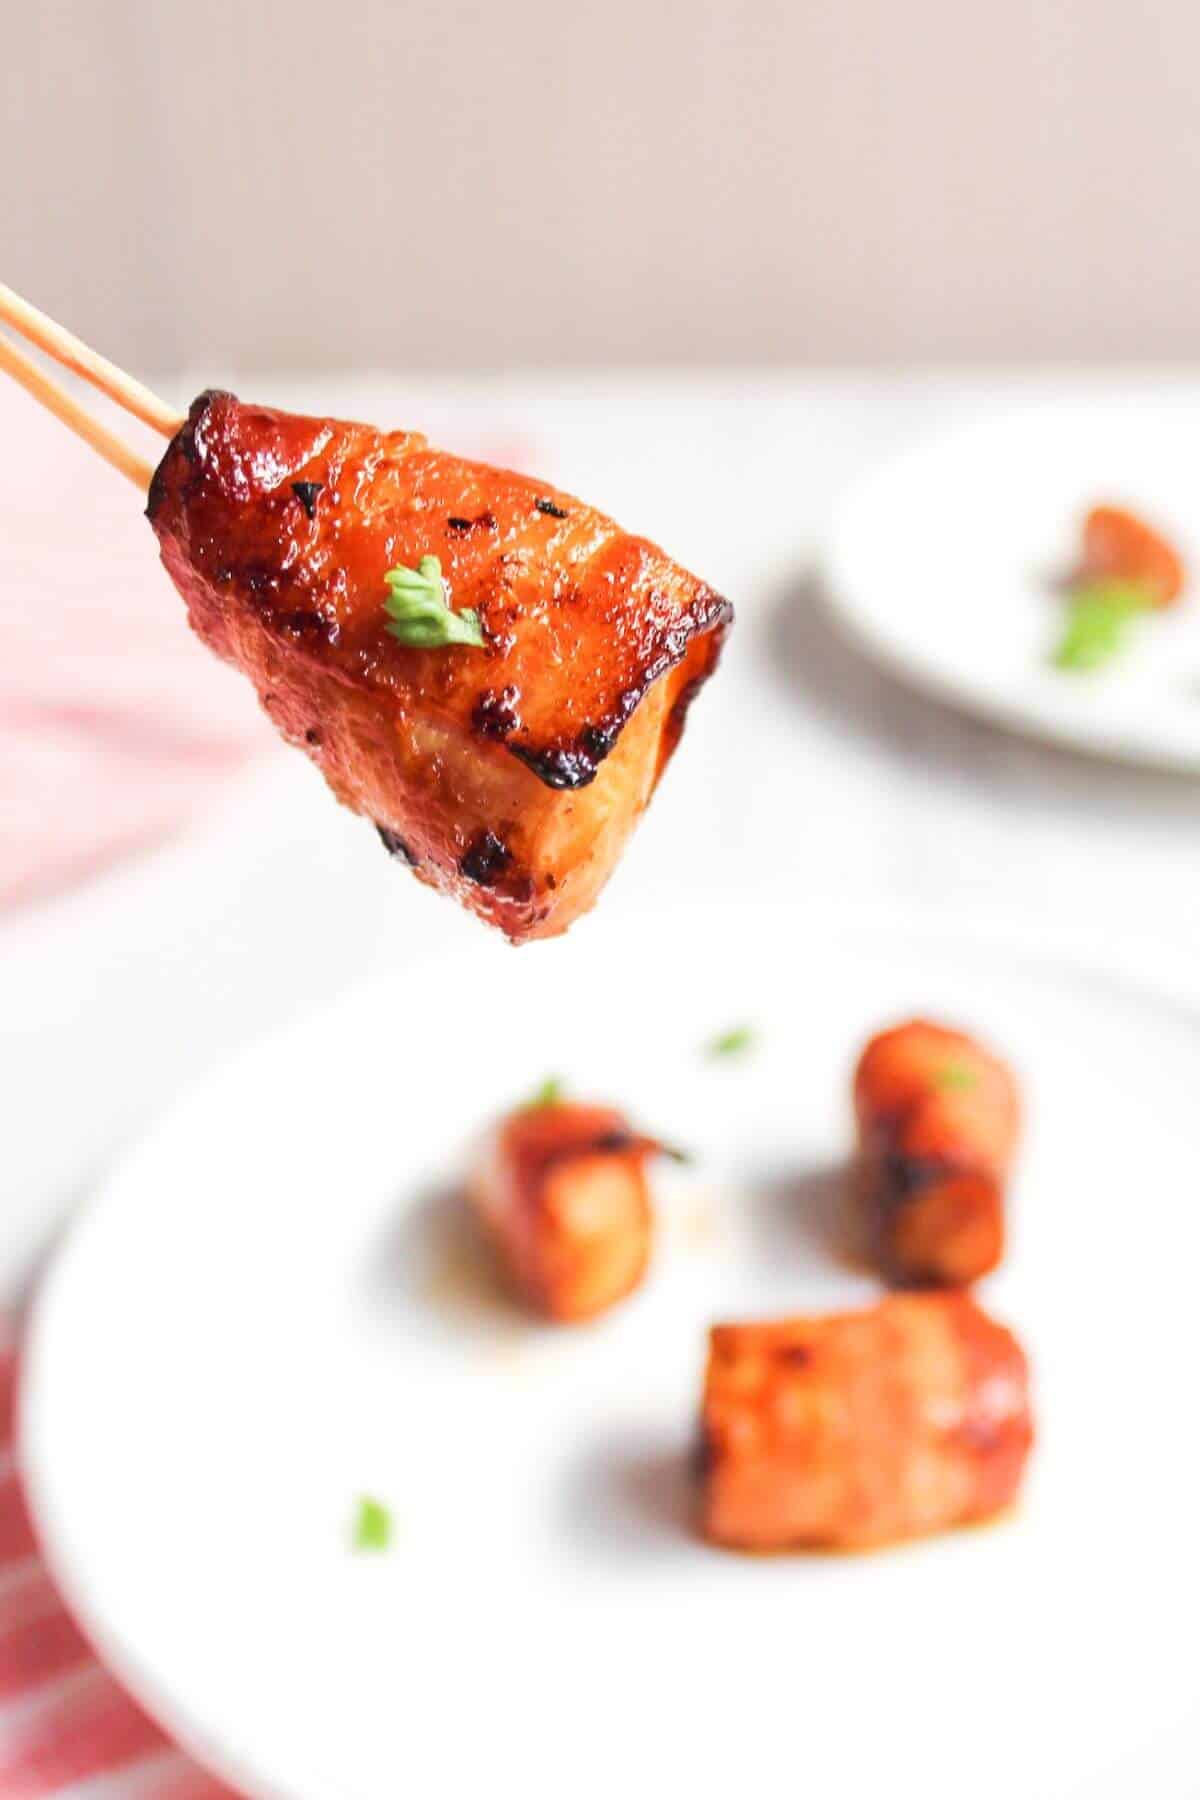 A person is holding a piece of bacon-wrapped salmon on a stick.